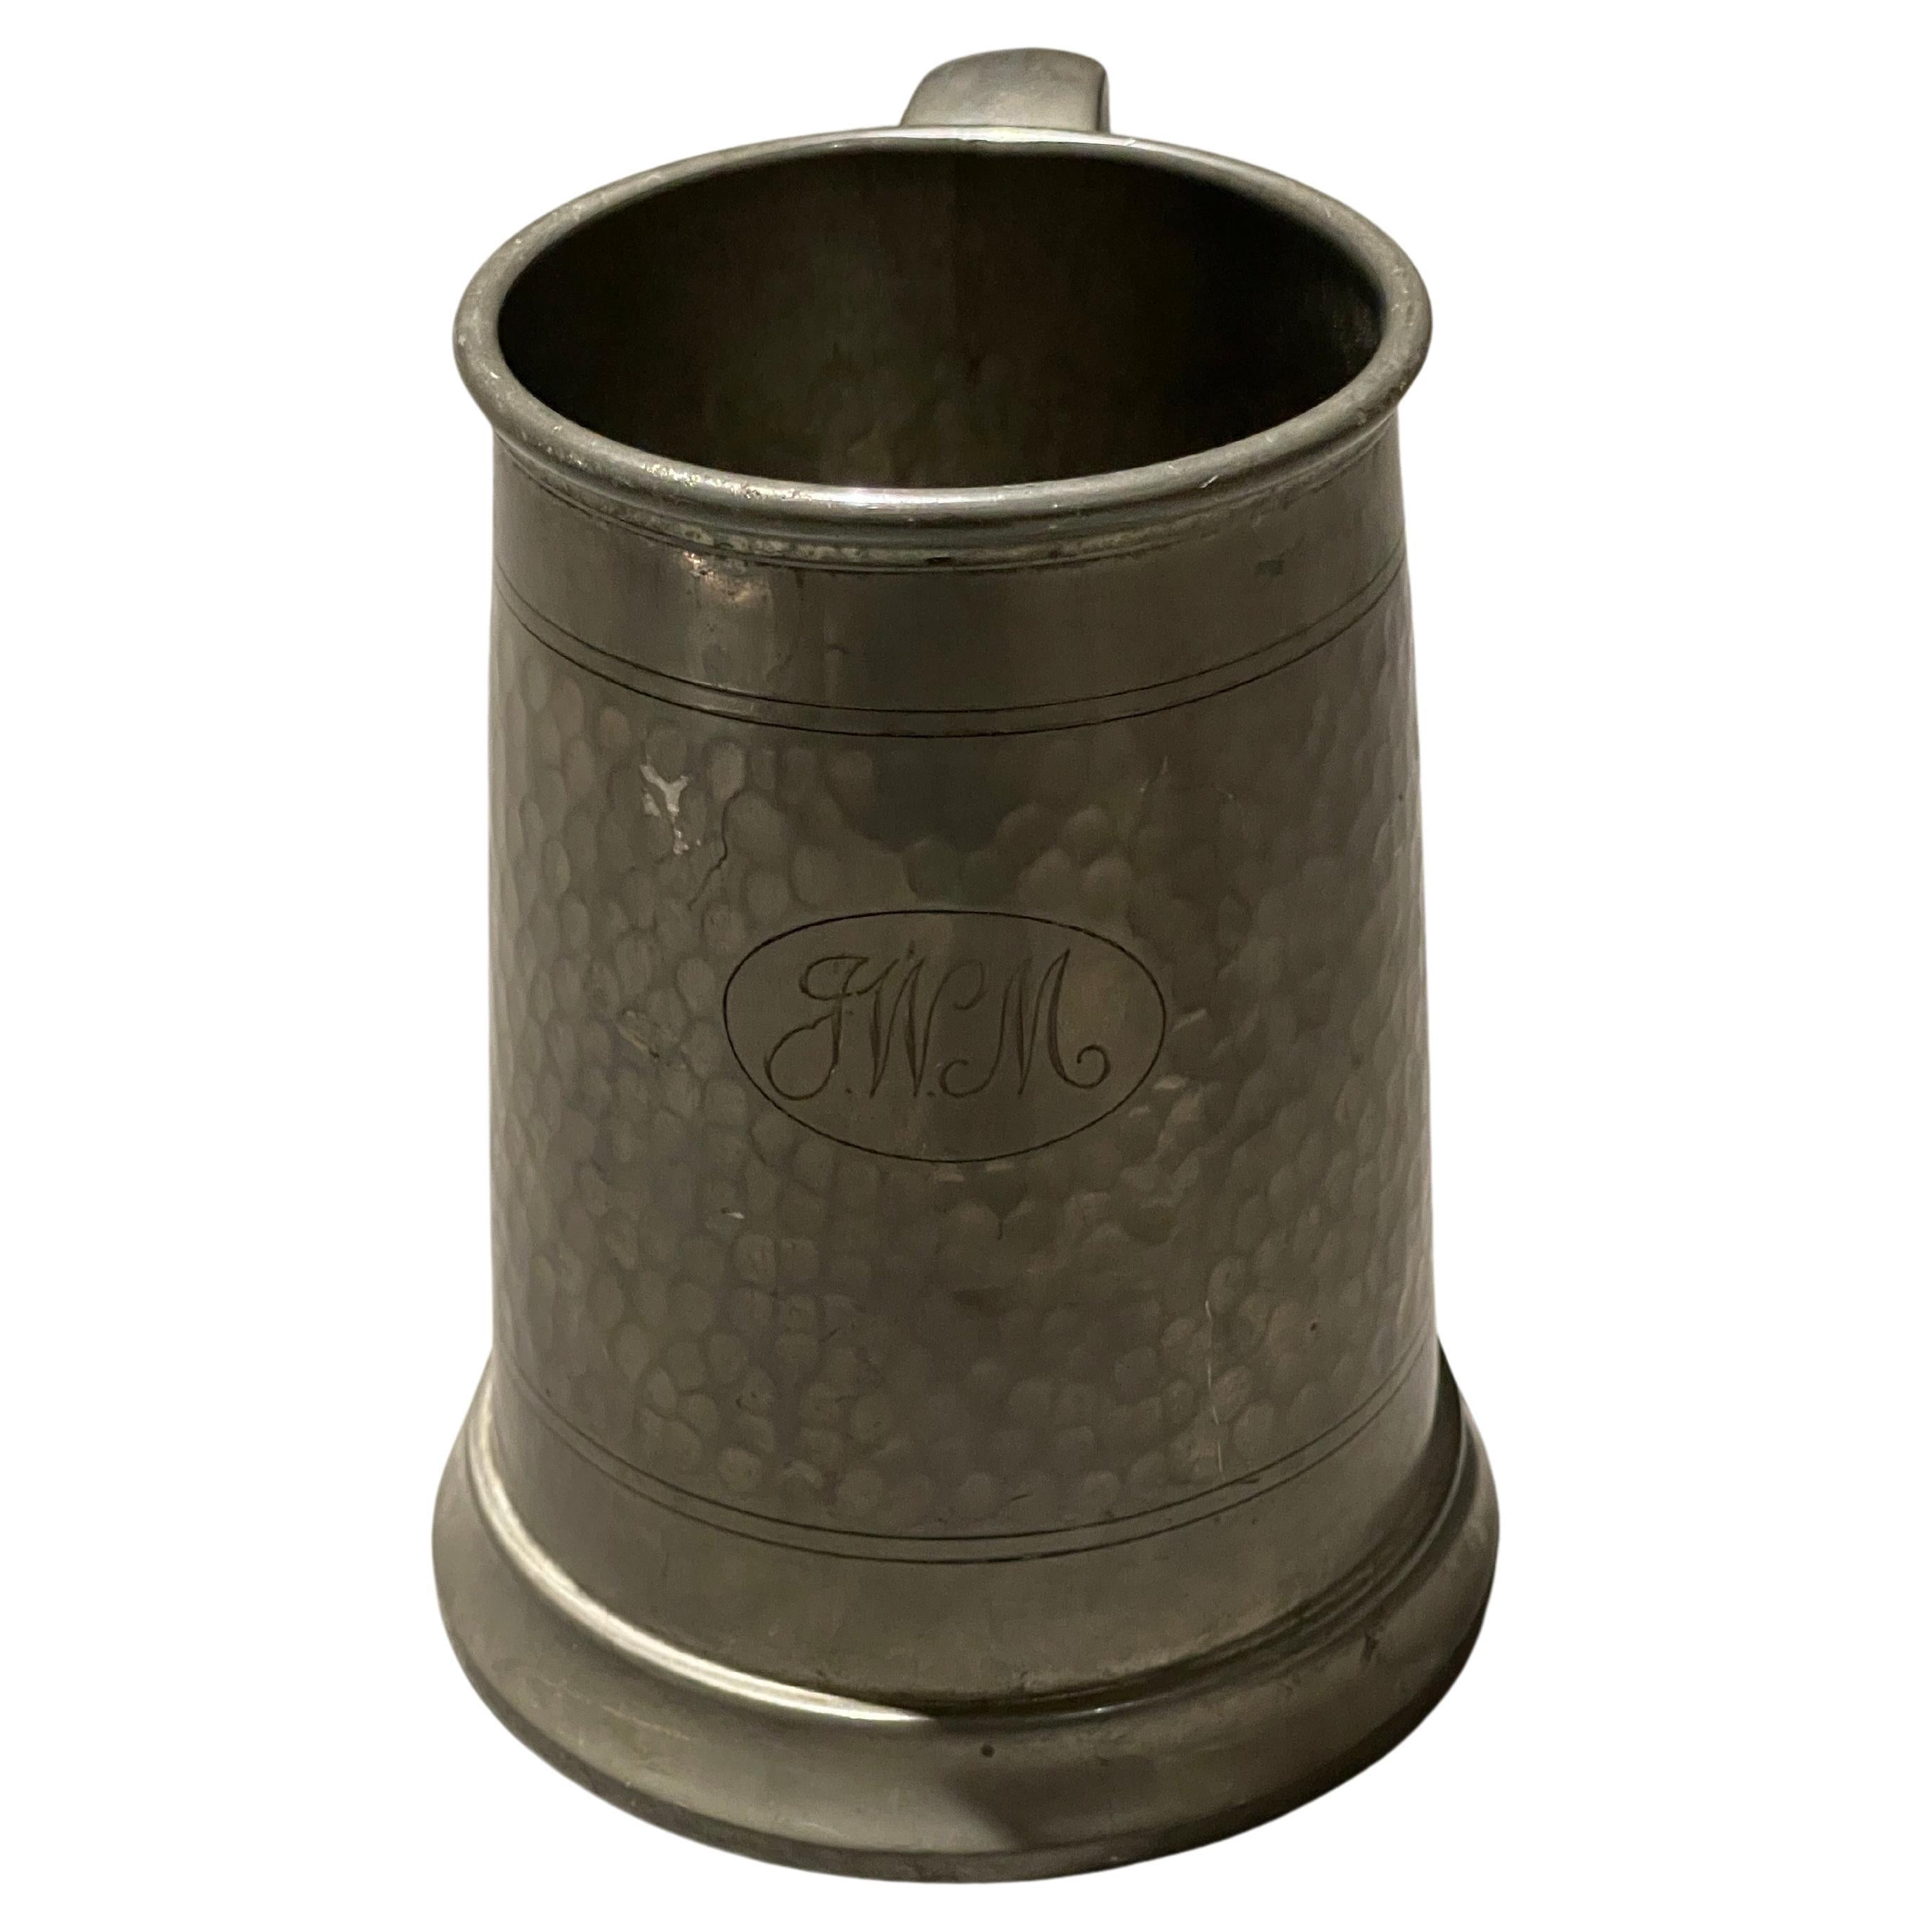 18th-century English pewter mug or cup with handle. Measures: 5.5